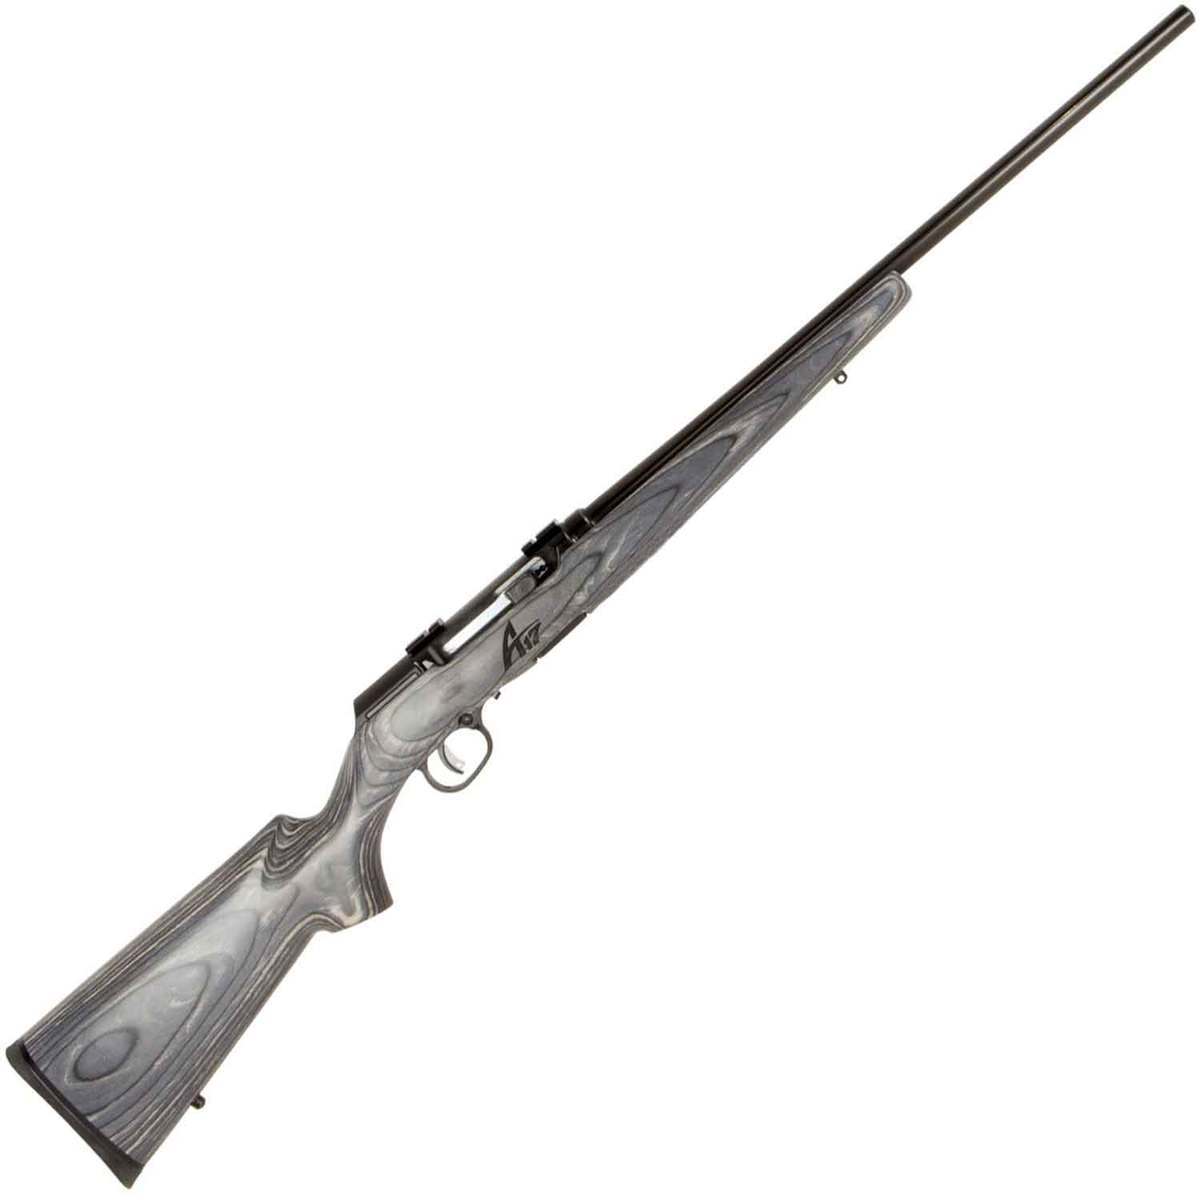 Savage Arms 93R17 XP Mossy Oak Brush Bolt Action Rifle - 17 HMR - 22in